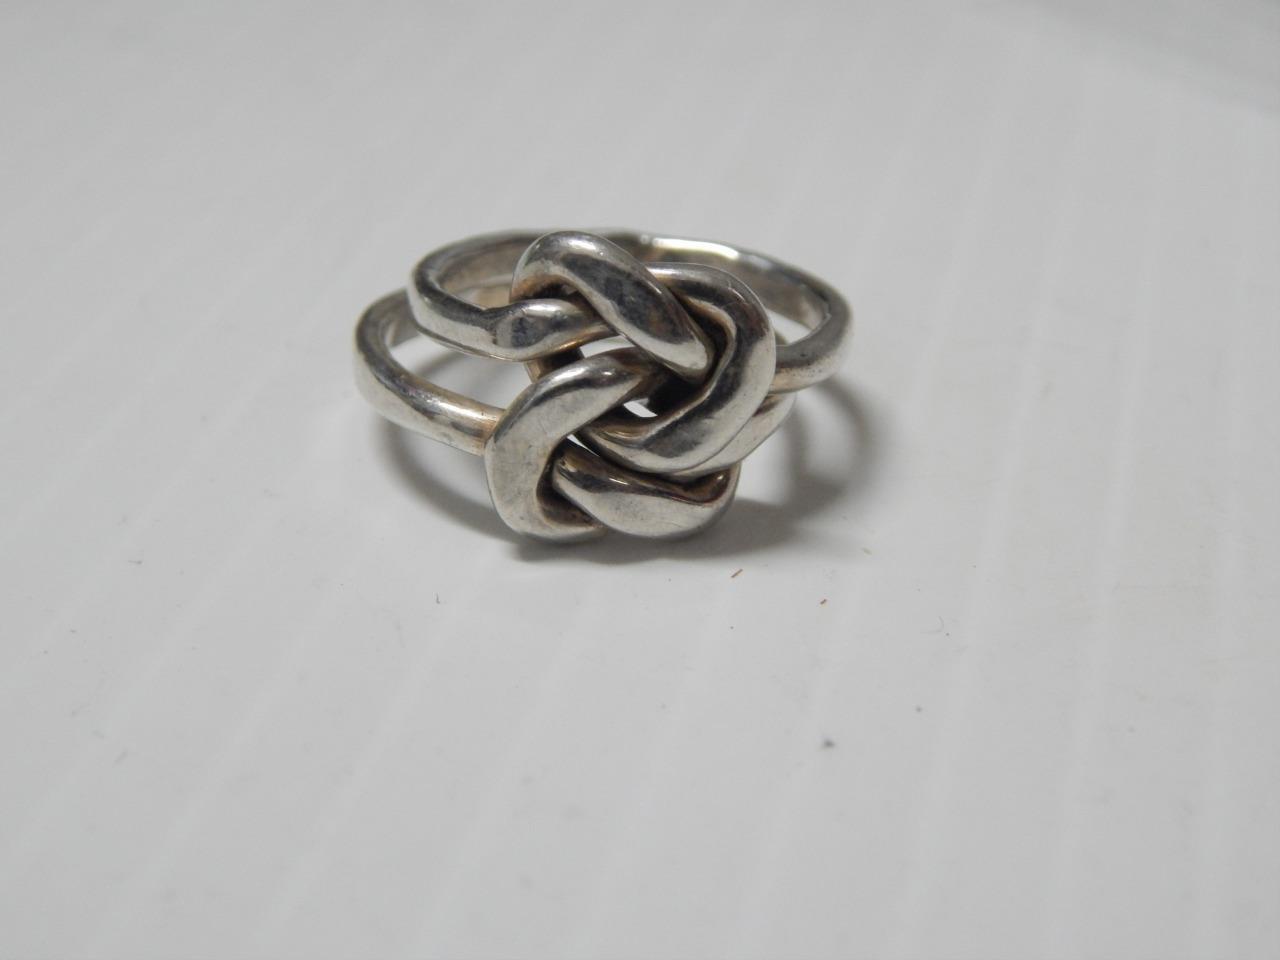 VINTAGE MEXICAN SOUTHWESTERN ARTICULATED STACKING STERLING SILVER  RING sz:6.5